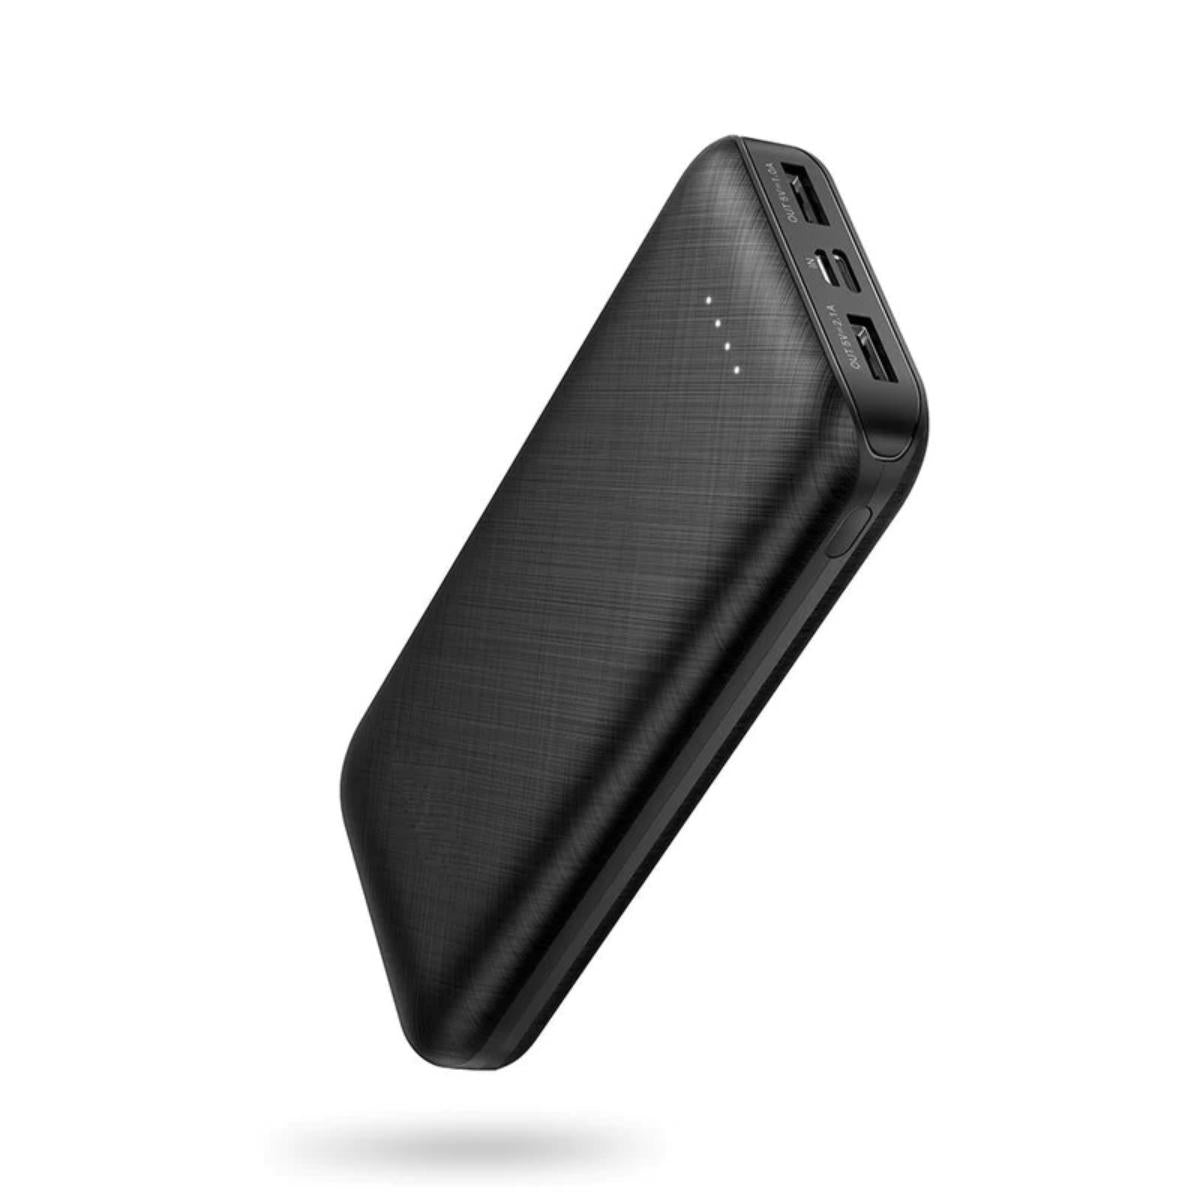 XO-PR150 / PD QUICK CHARGE TYPE C OUTPUT large capacity 20000mAh power bank Power Bank / Black / N/A